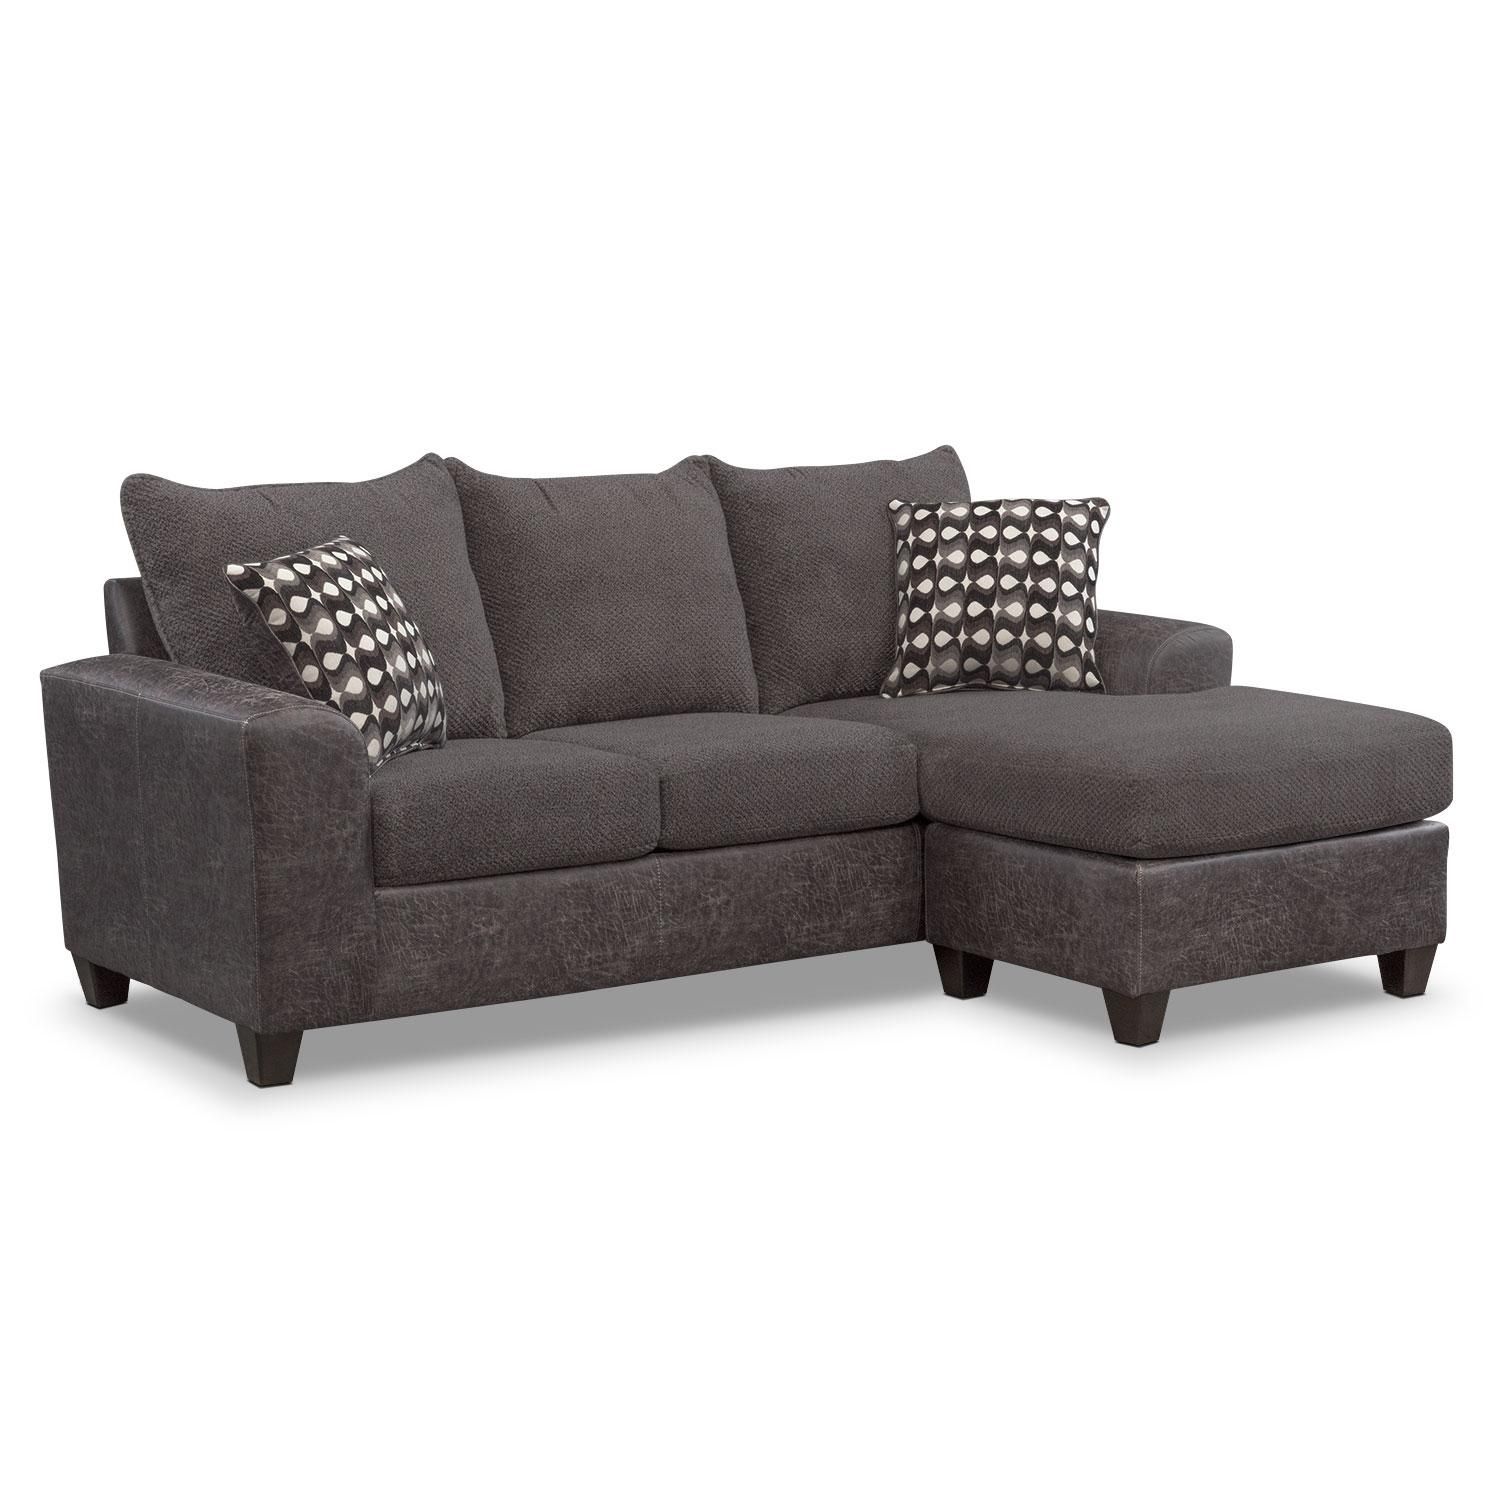 Sofas & Couches | Living Room Seating | Value City Furniture With Regard To Value City Sofas (View 1 of 20)